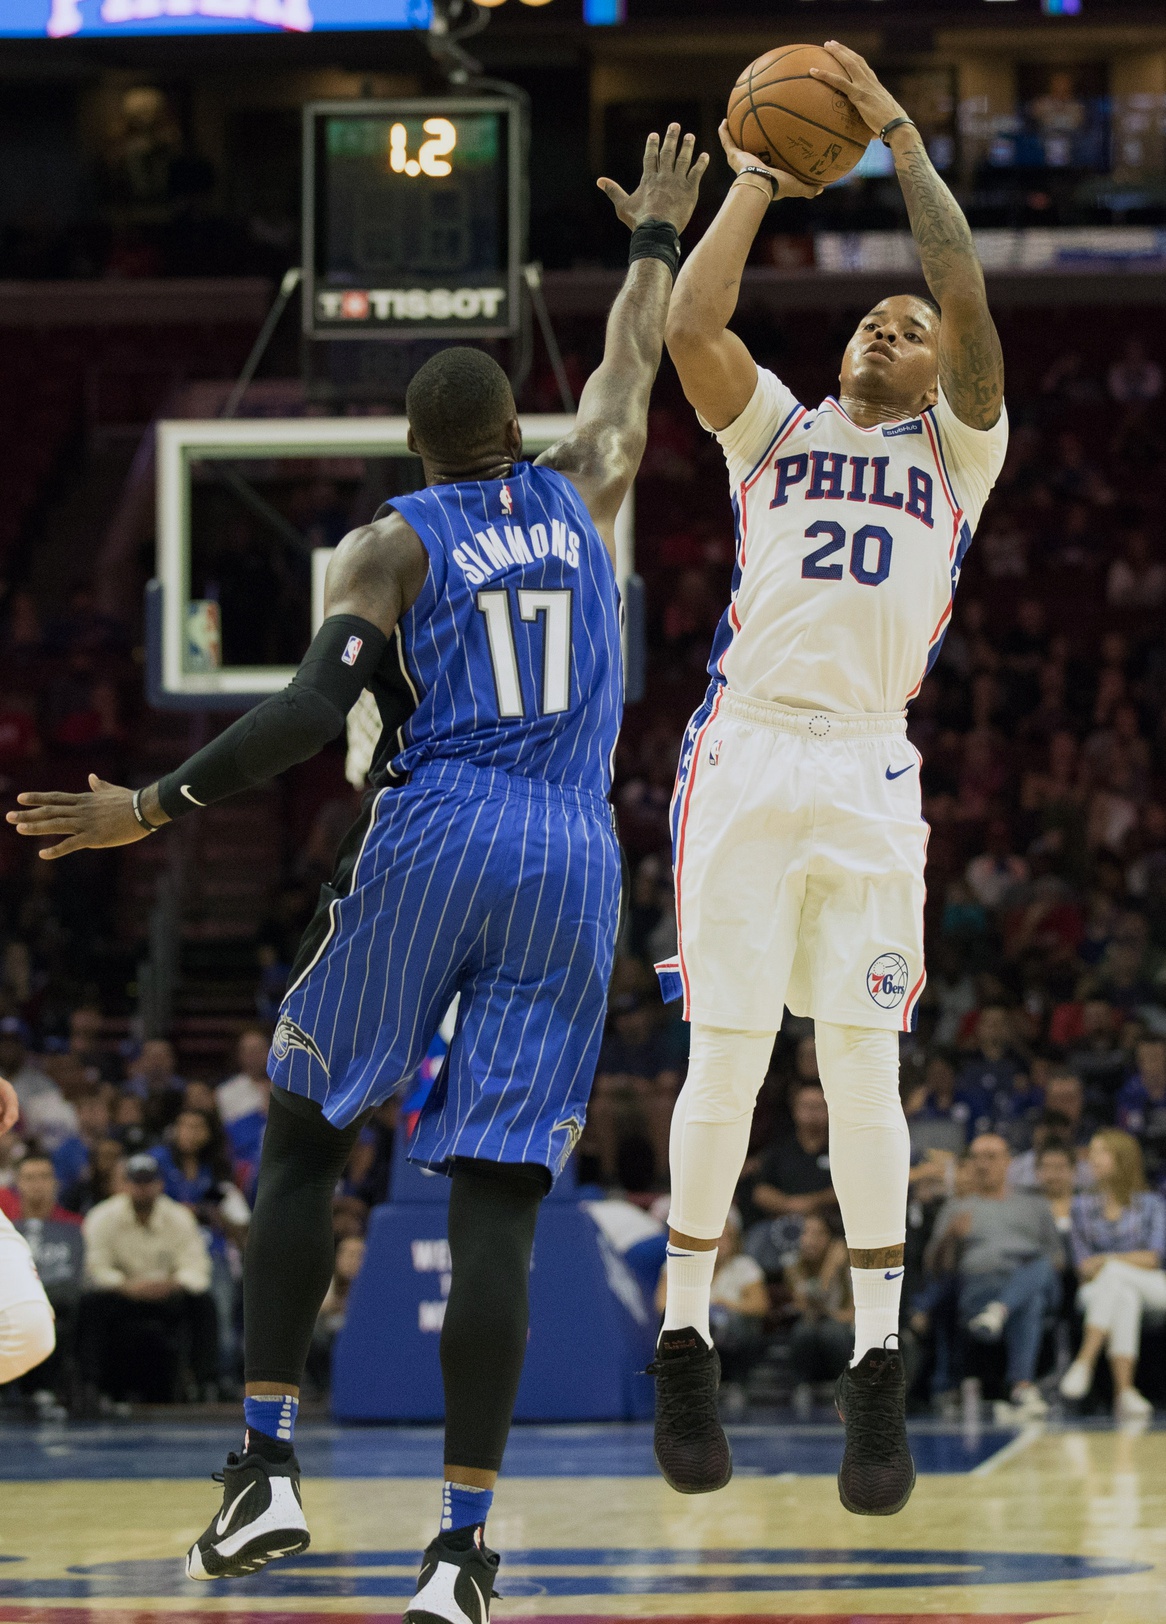 “I Wish I Had a Chance to Help Them,” Says Markelle Fultz of Sixers Tenure